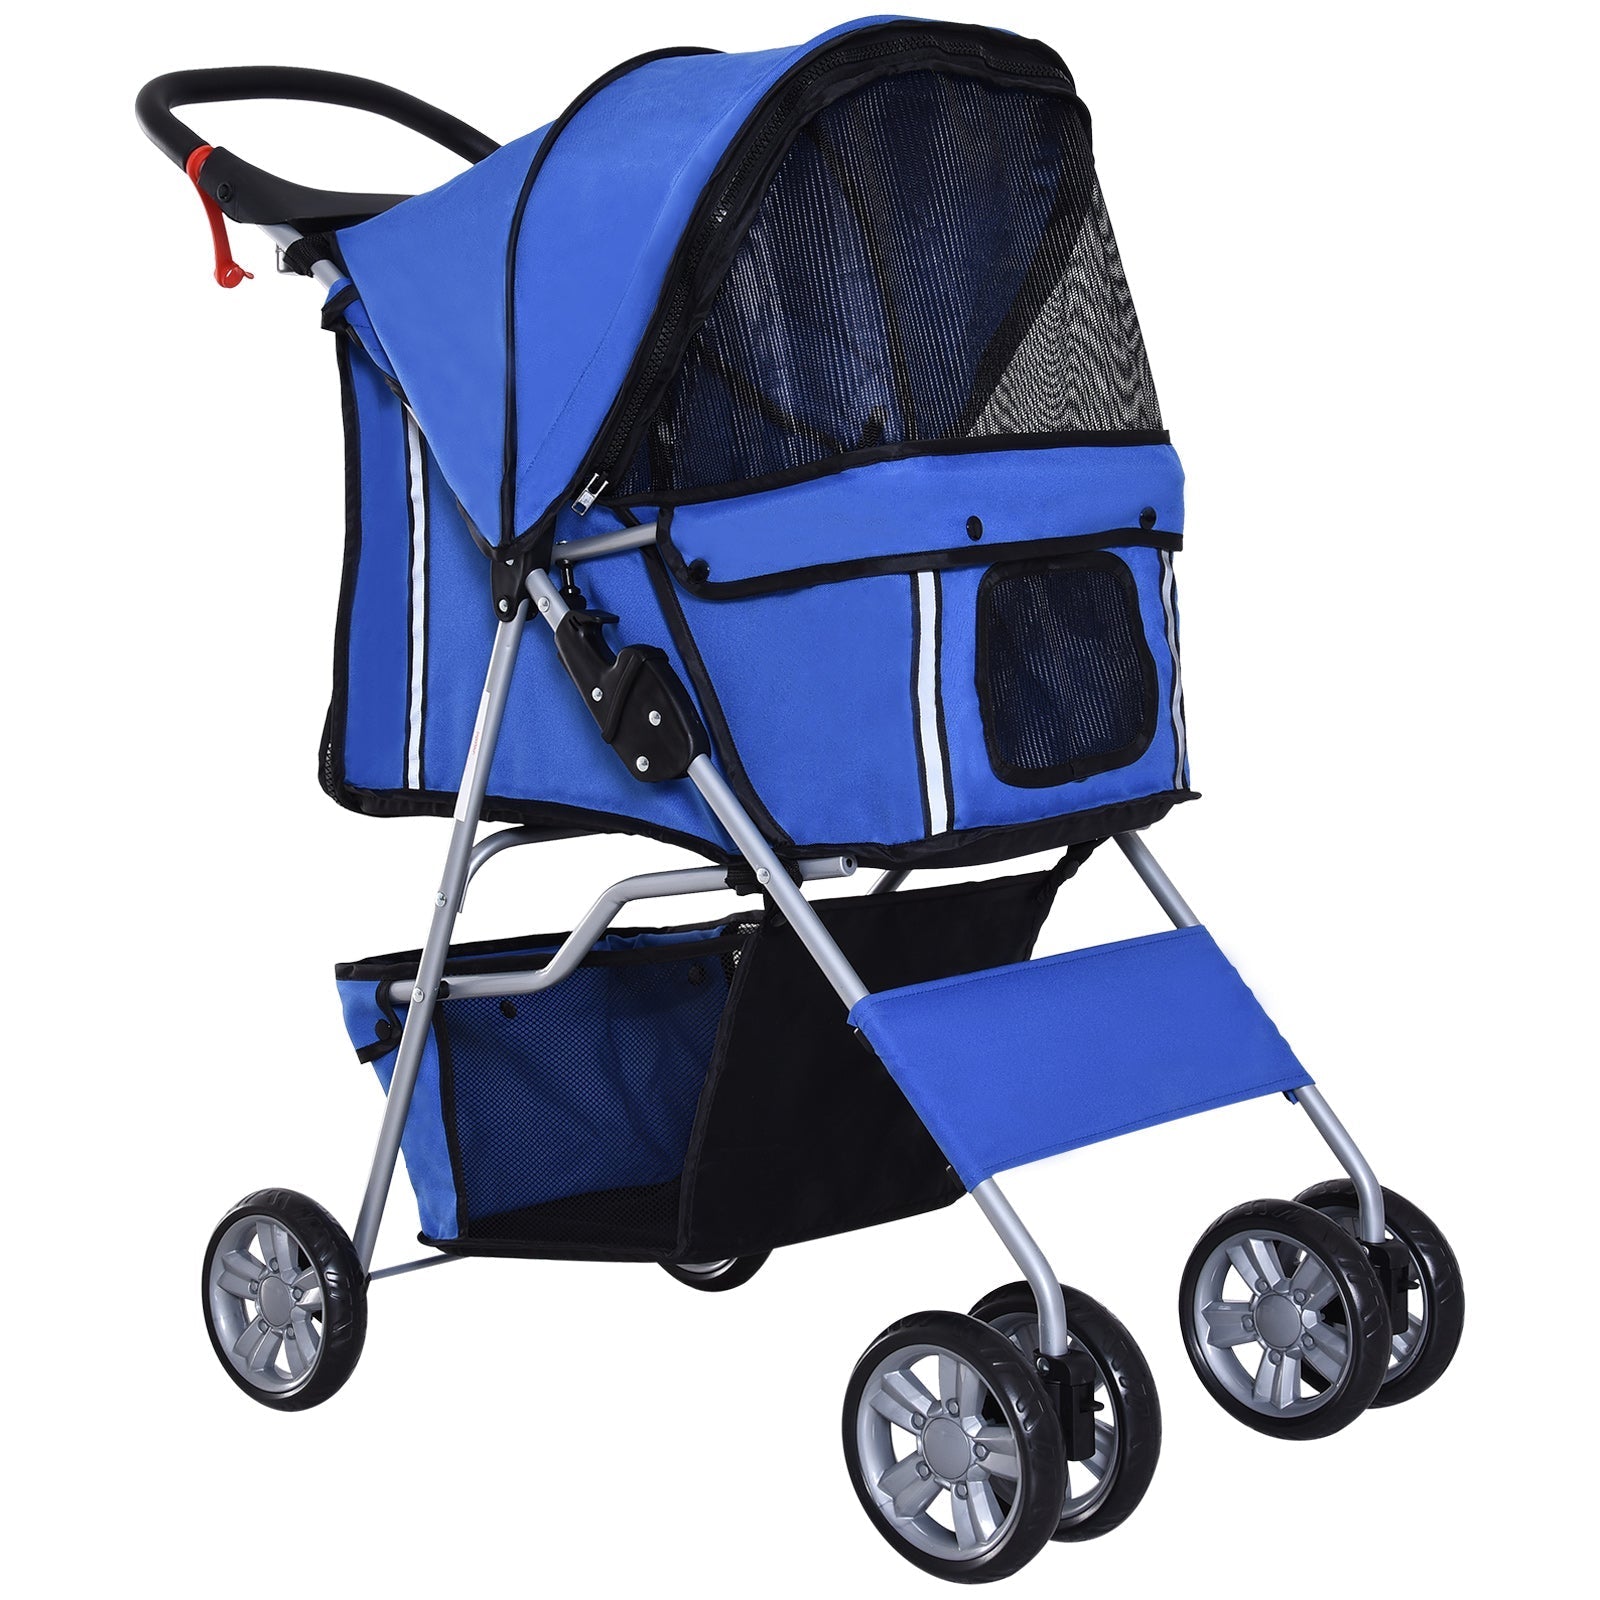 Dog Pushchair for Small Miniature Dogs Cats Foldable Travel Carriage with Wheels Zipper Entry Cup Holder Storage Basket, PawHut, Blue